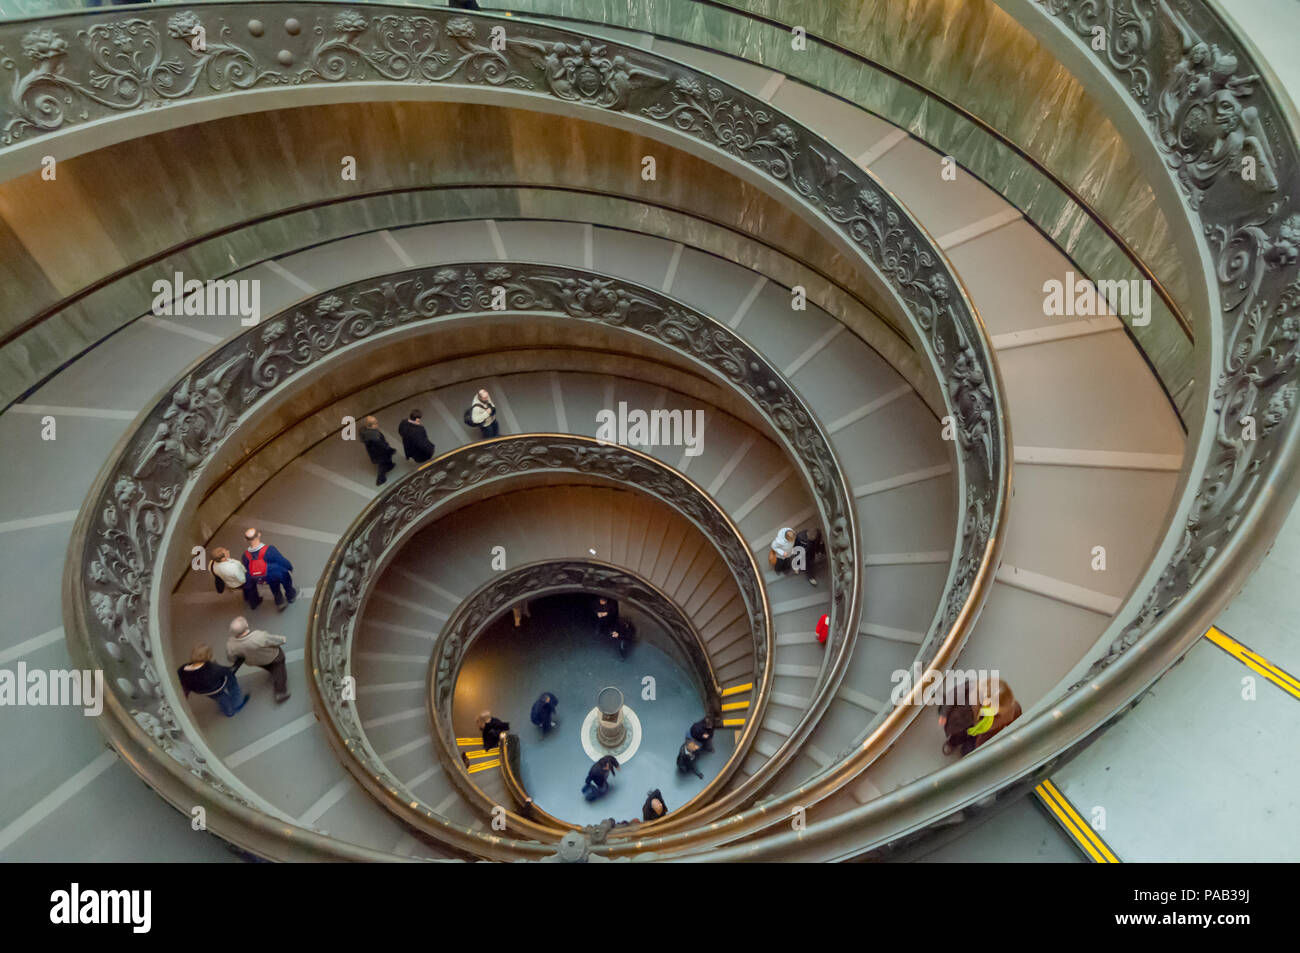 Giuseppe Modo's famous double helix spiral staircase in the Vatican Museum in Rome Stock Photo